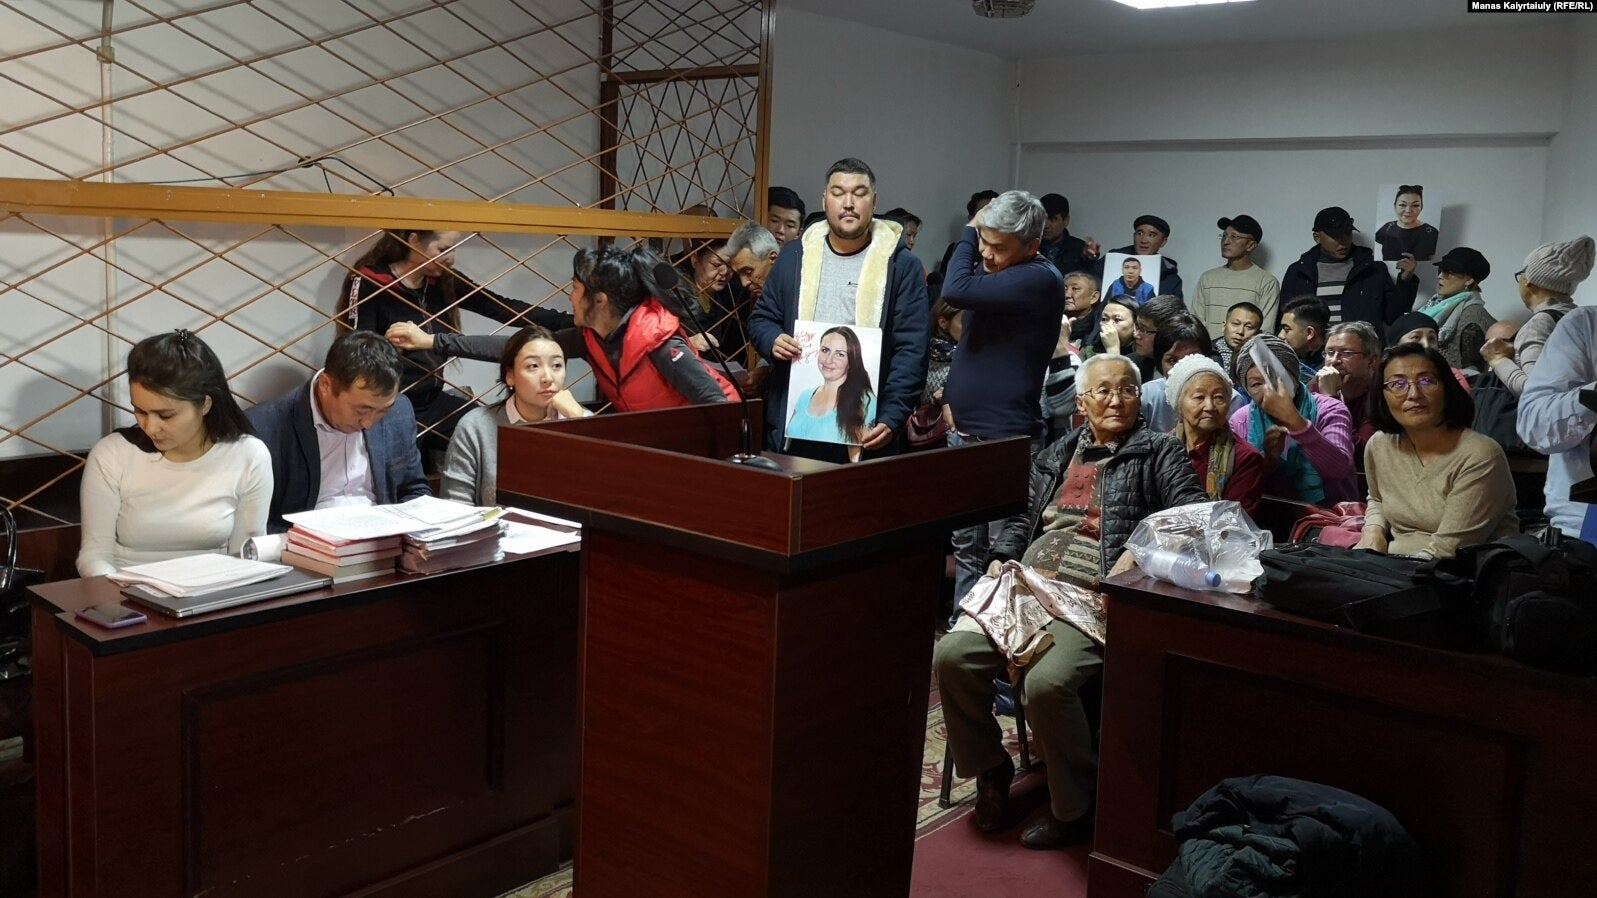 Four women accused of participating in the activities of the banned Democratic Choice movement on trial in Almaty, Kazakhstan, November 6, 2019.